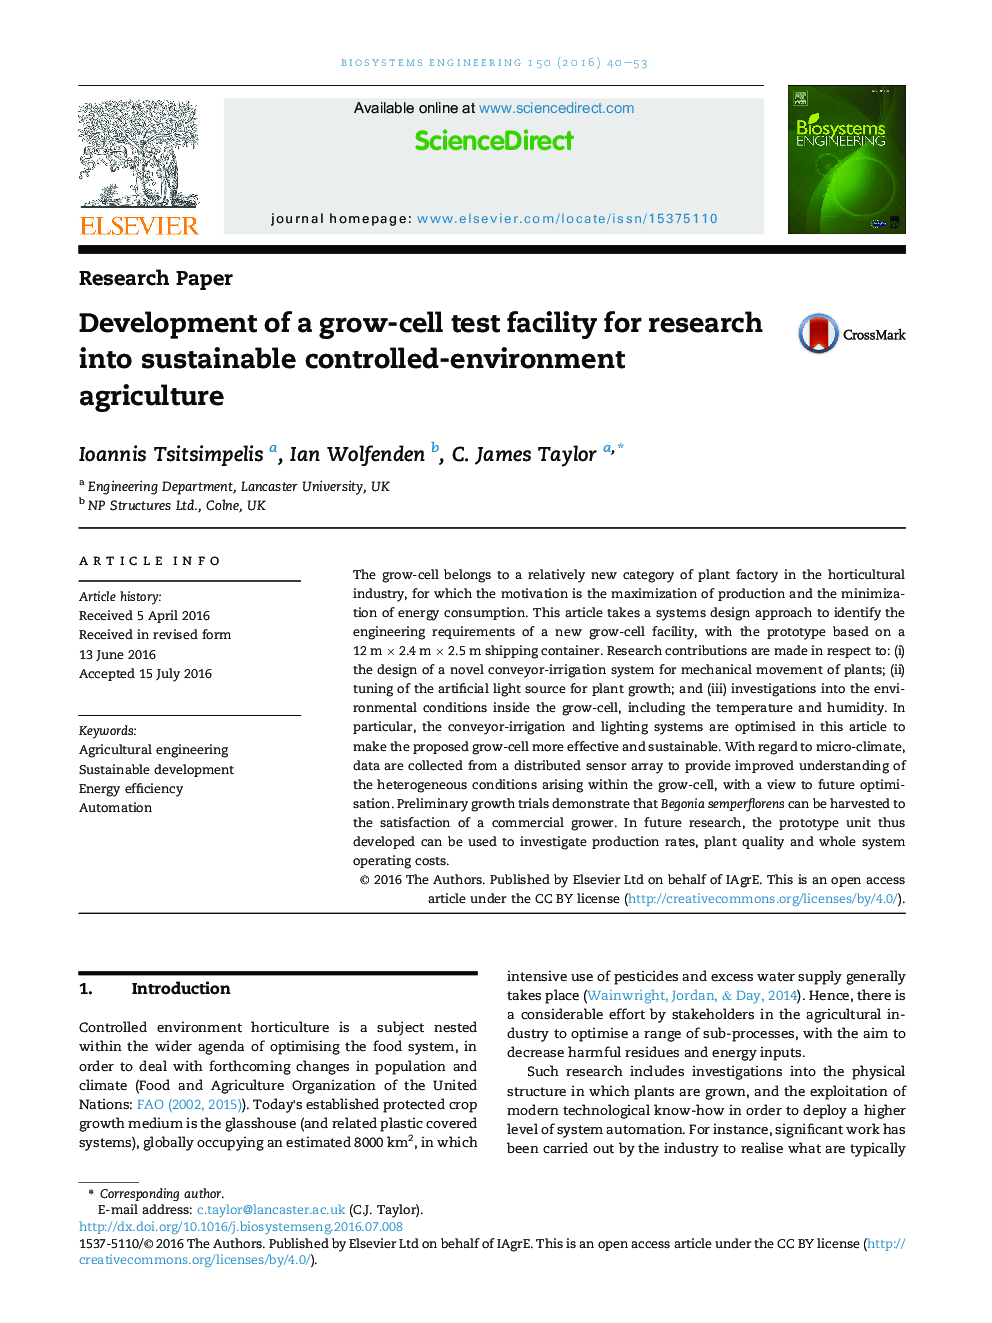 Development of a grow-cell test facility for research into sustainable controlled-environment agriculture